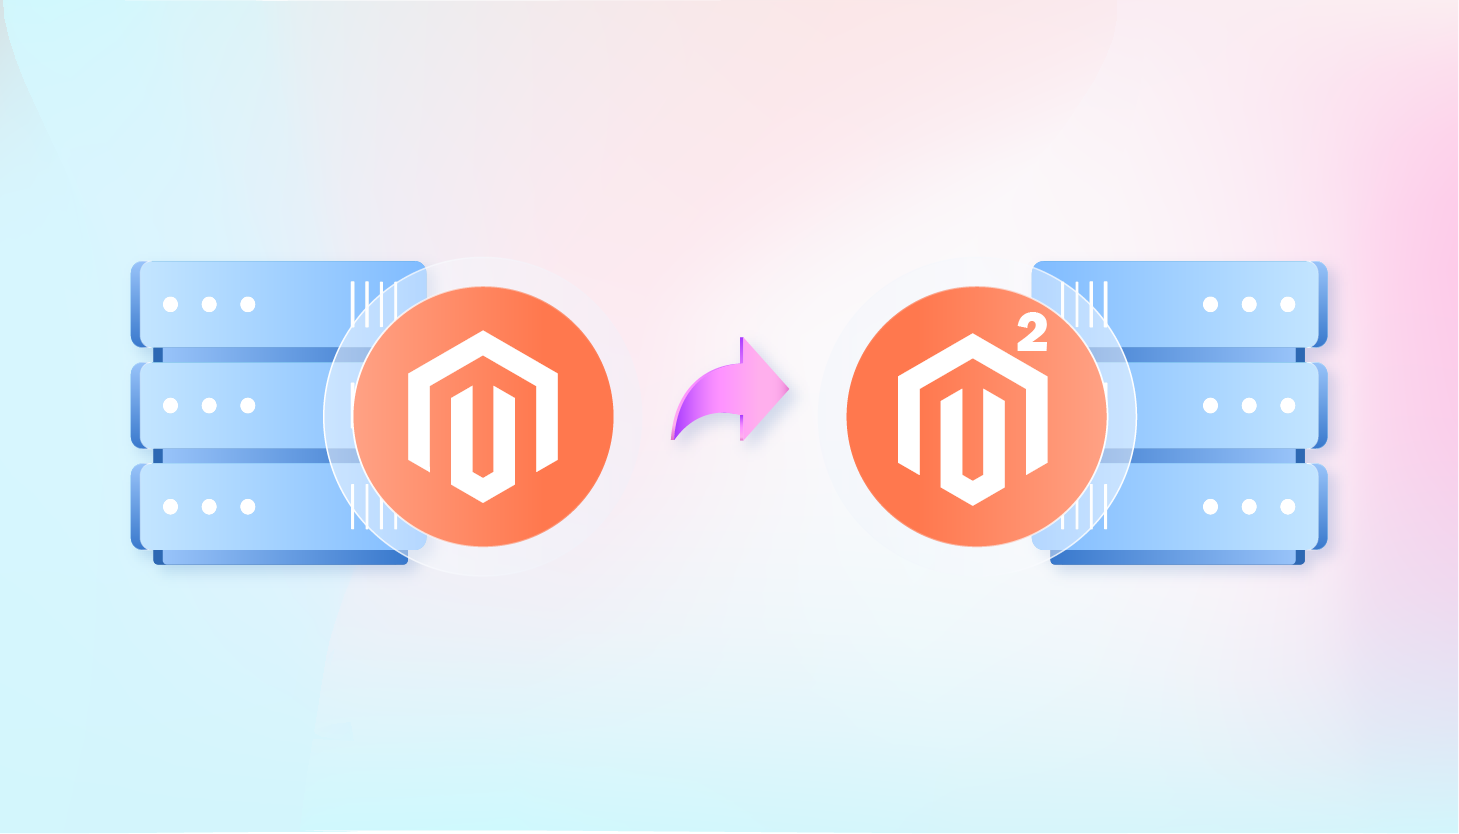 Best Magento 1 Hosting Practices for a Smooth Upgrade to Magento 2